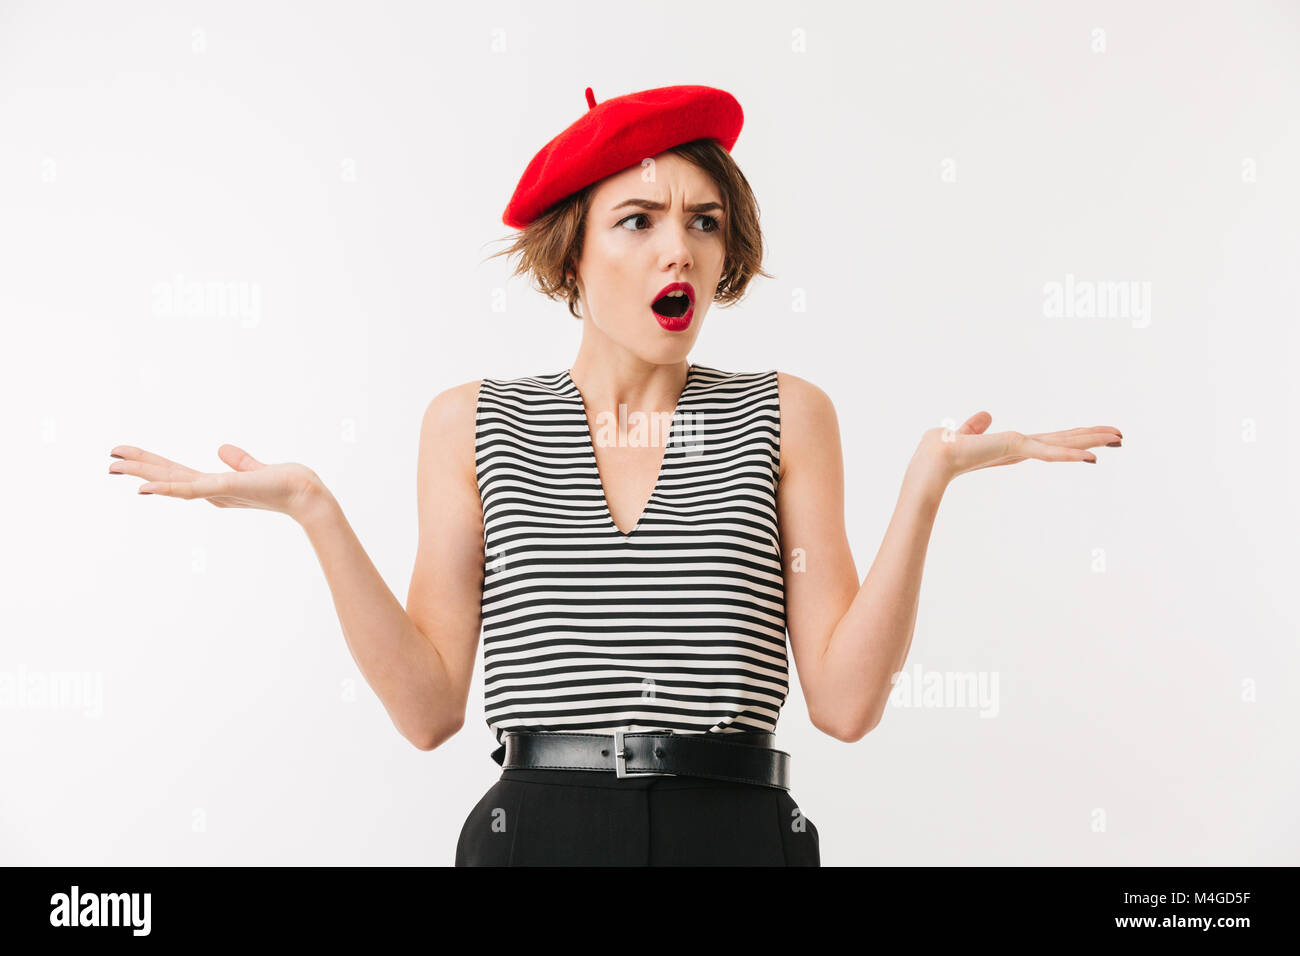 Portrait of a confused woman wearing red beret shrugging shoulders isolated over white background Stock Photo